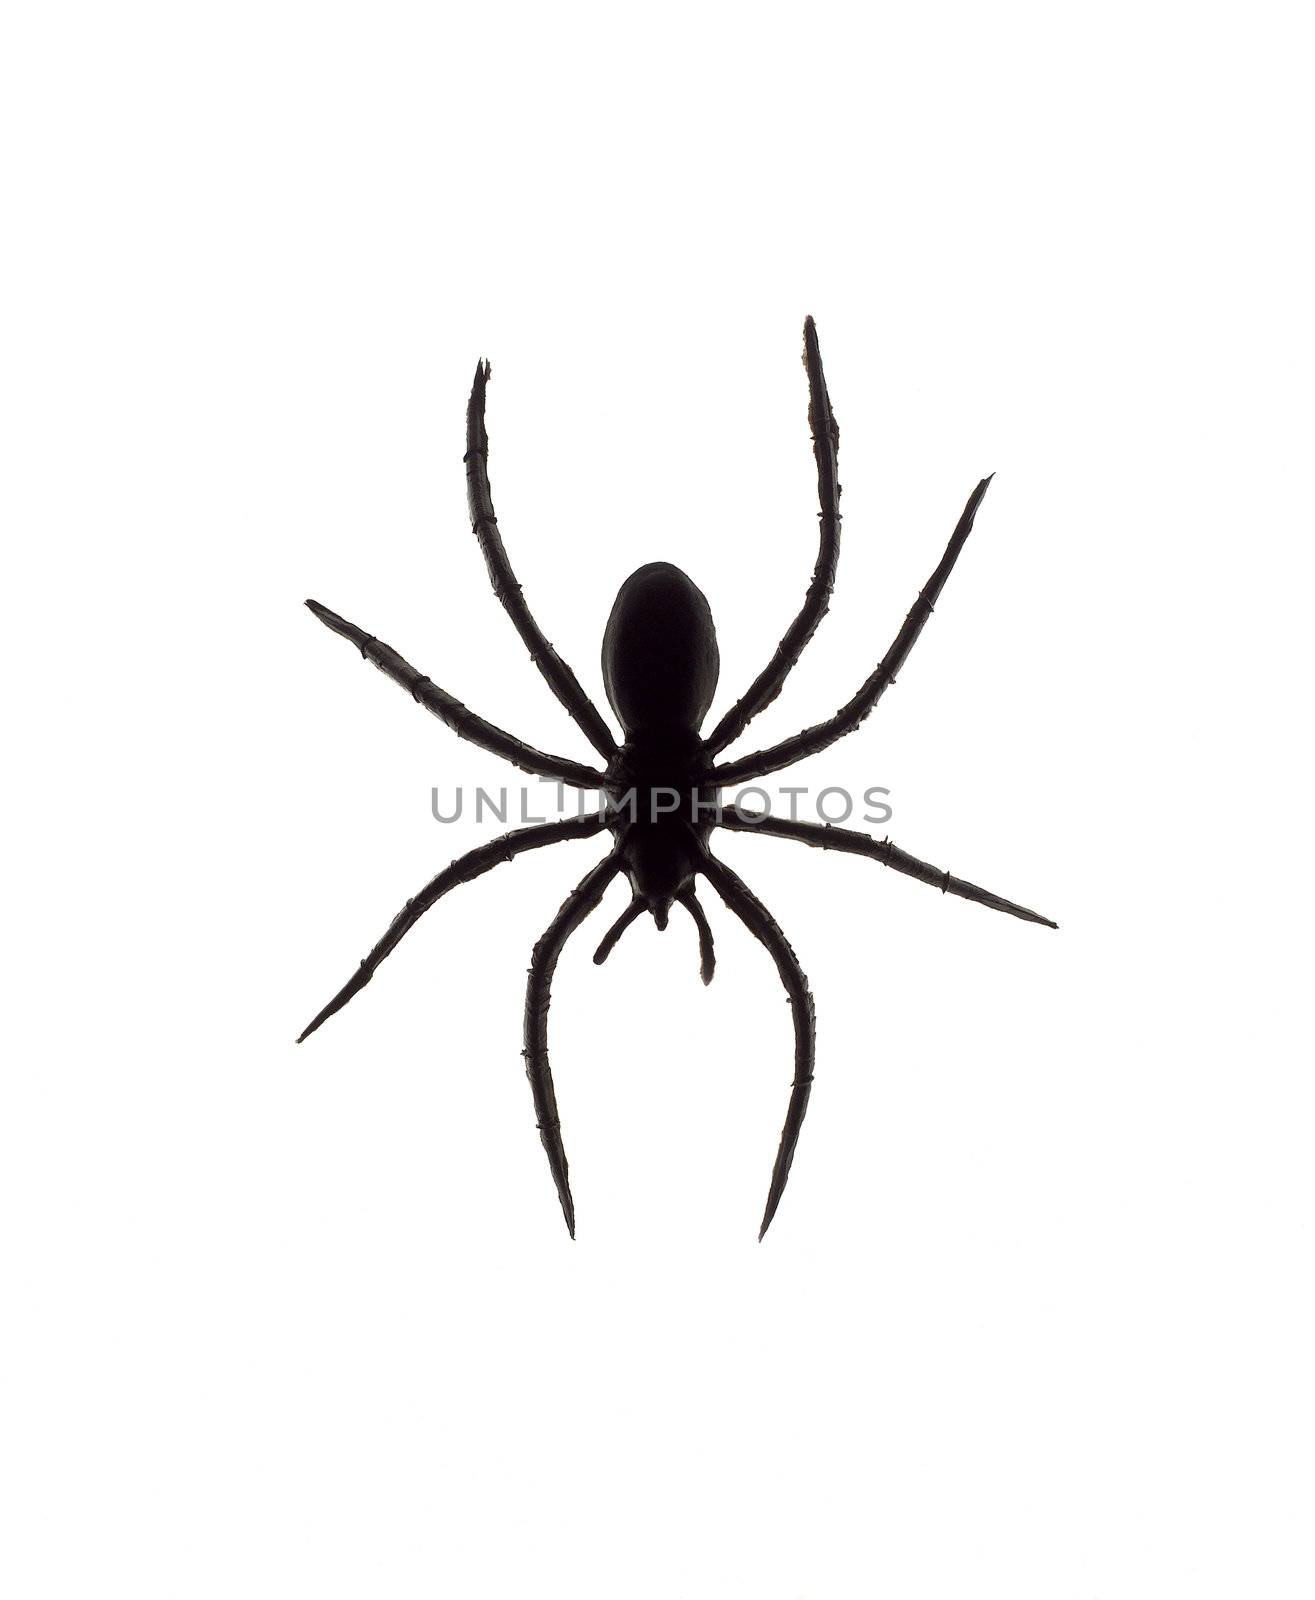 Toy Spider isolated on white background